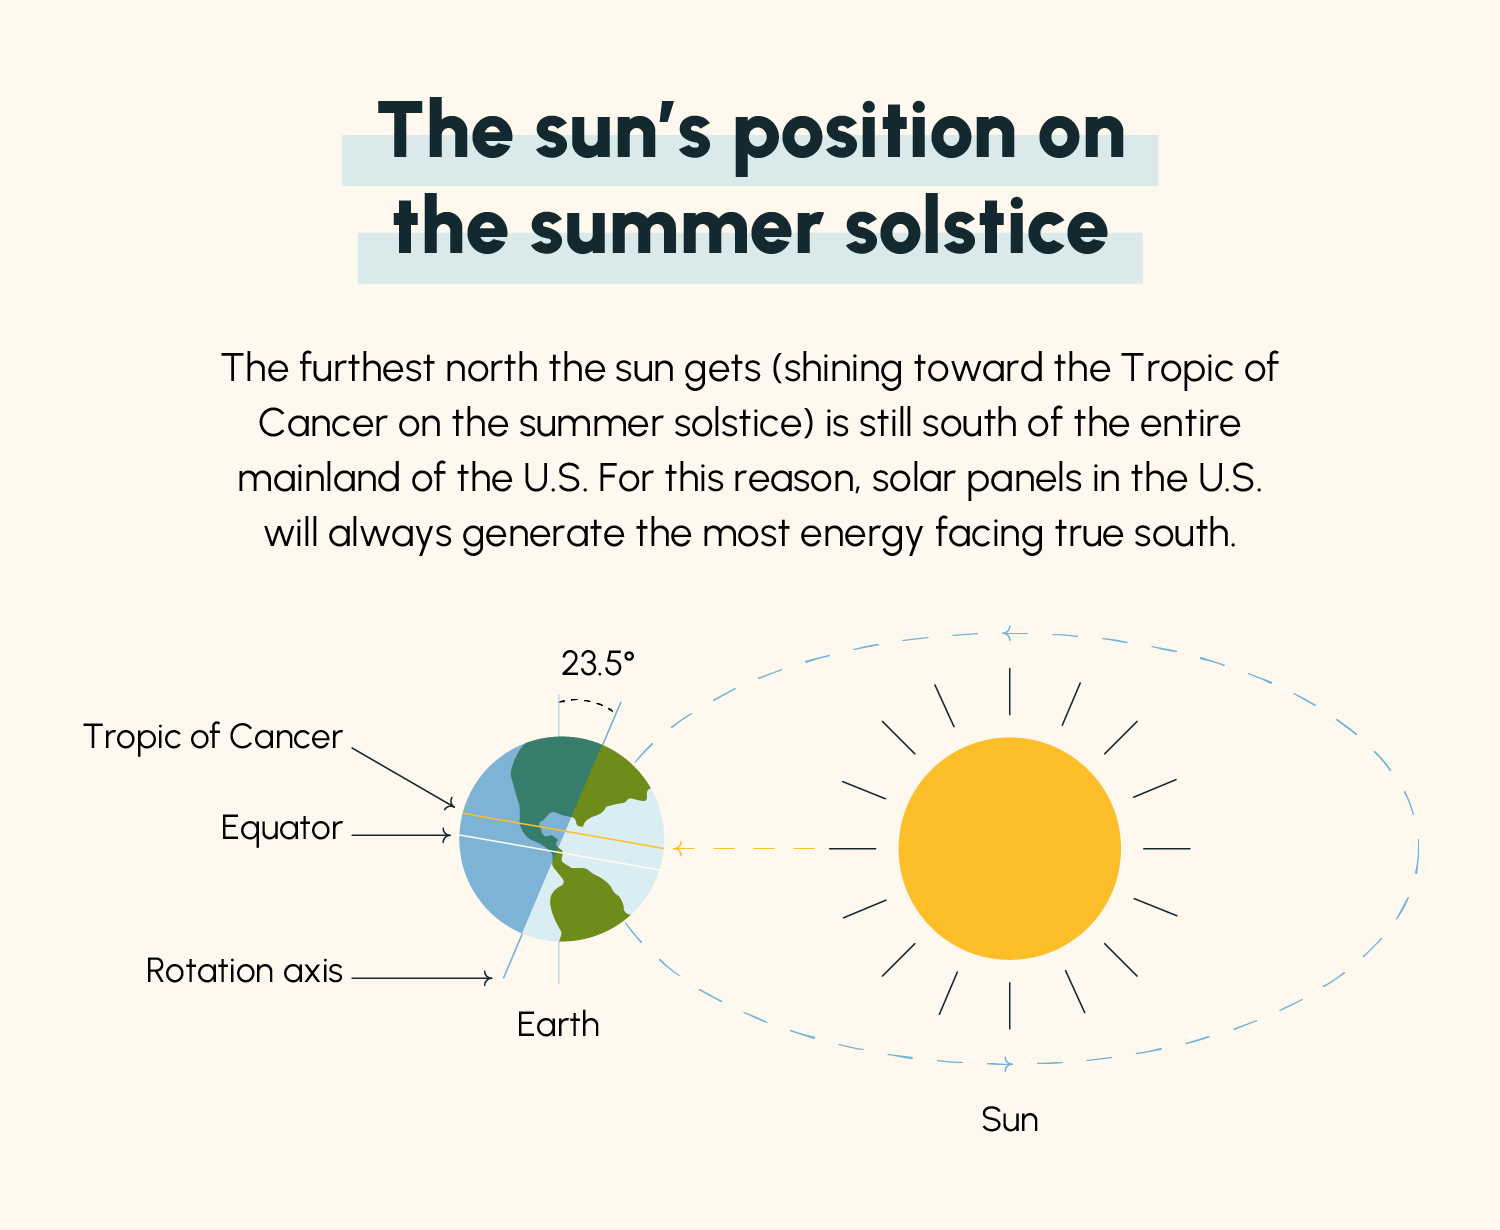 A diagram demonstrating that the sun is always directed south of the U.S., including on the summer solstice